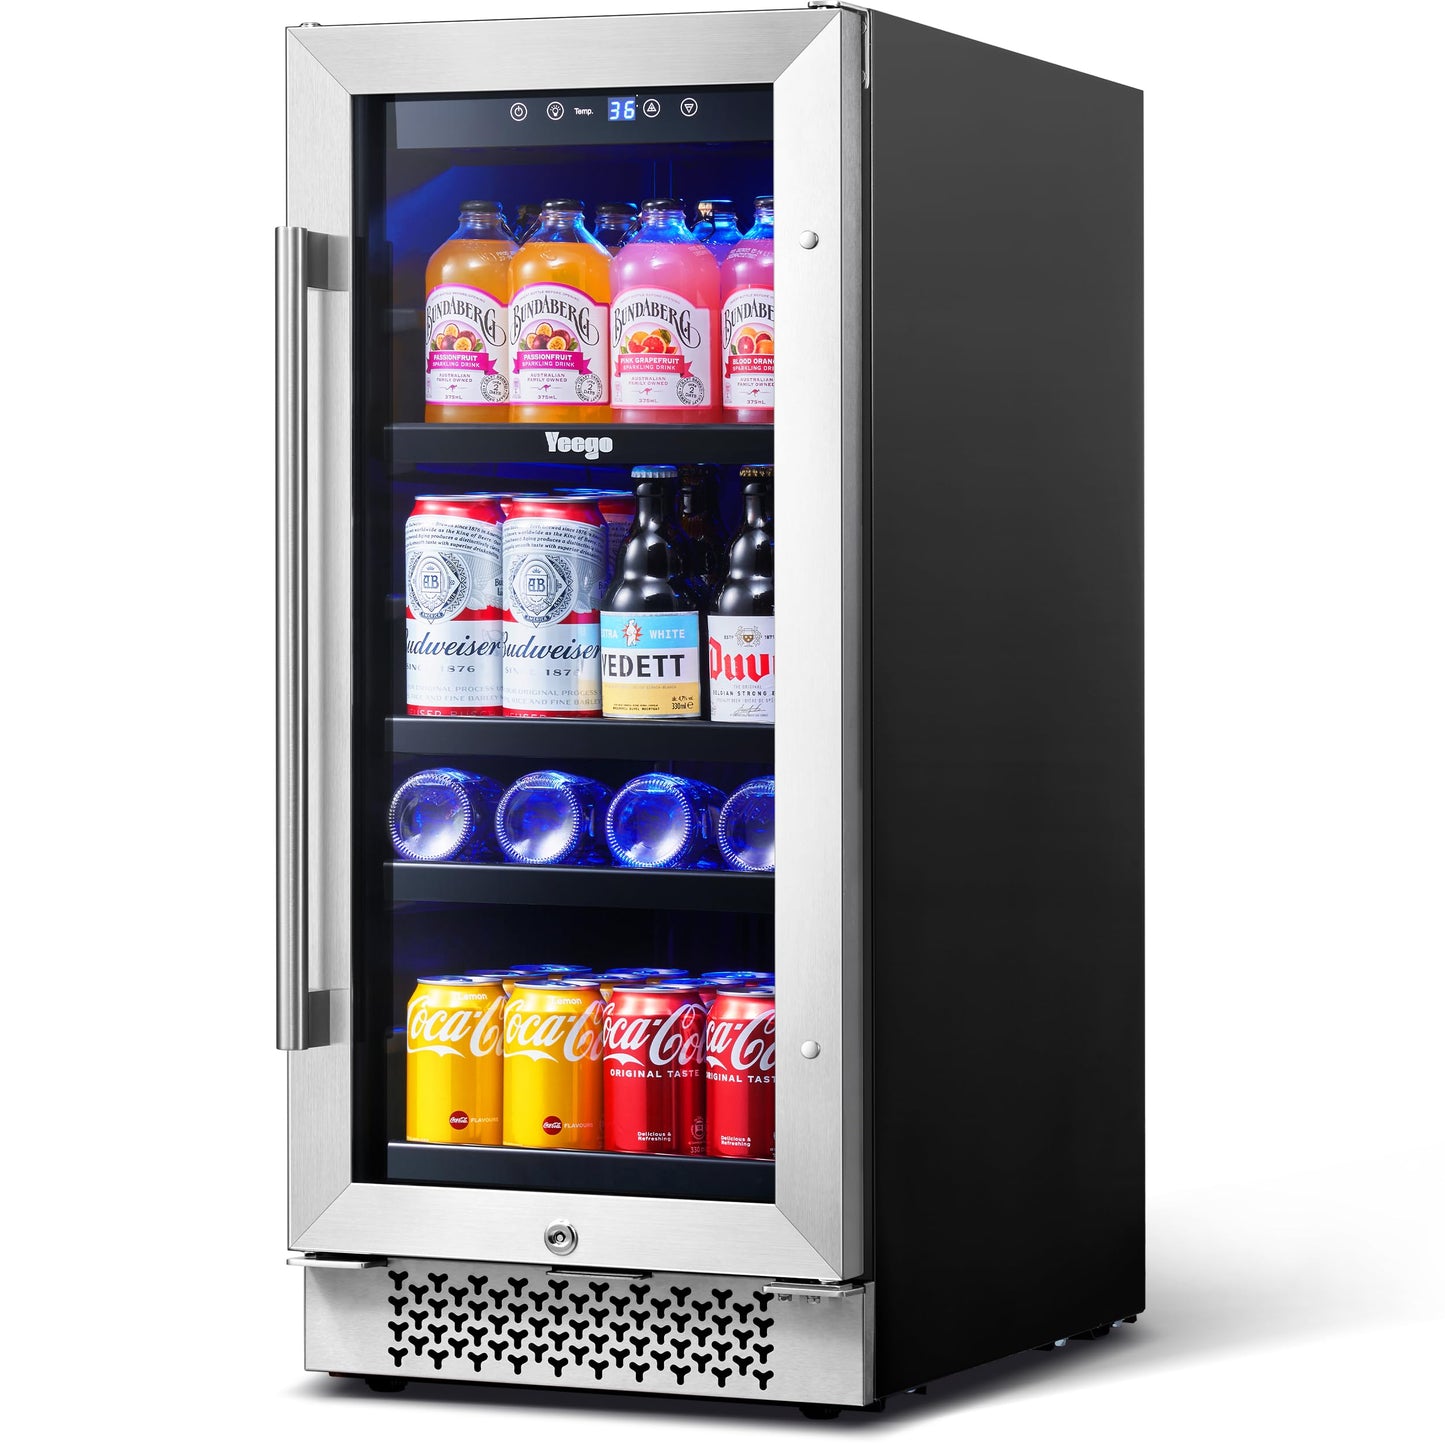 Yeego Beverage Refrigerator, 15 Inch Beverage Fridge, 80 Cans Beer Fridge with Advanced Cooling System(34-54°F), Built-in or Freestanding for Drink Soda Wine Water, Quiet Operation